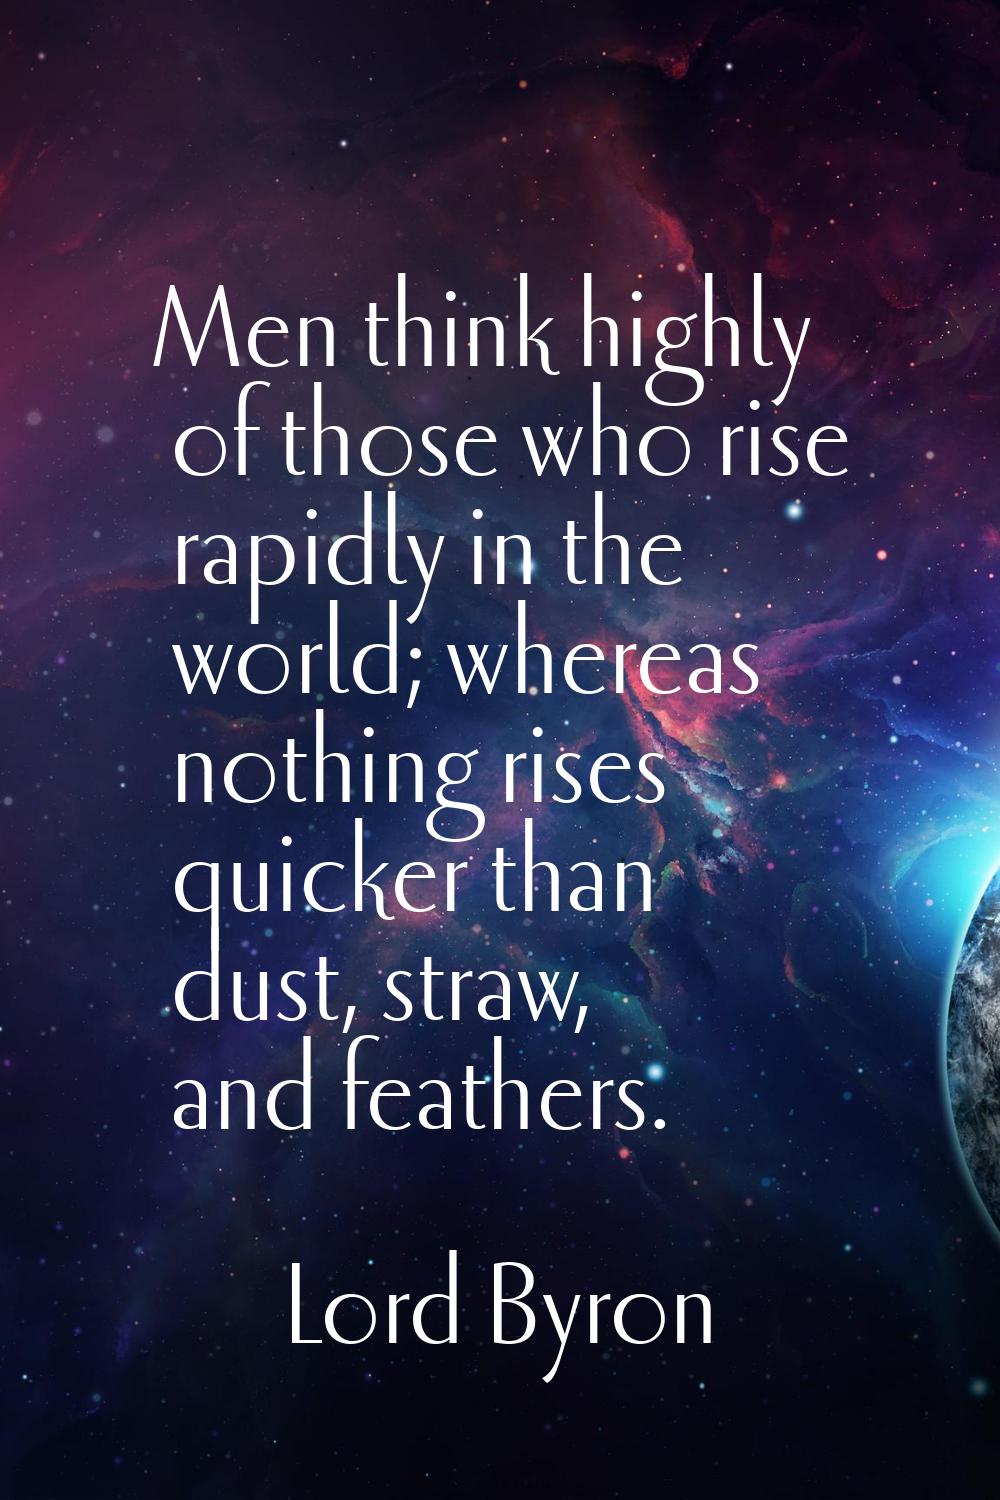 Men think highly of those who rise rapidly in the world; whereas nothing rises quicker than dust, s